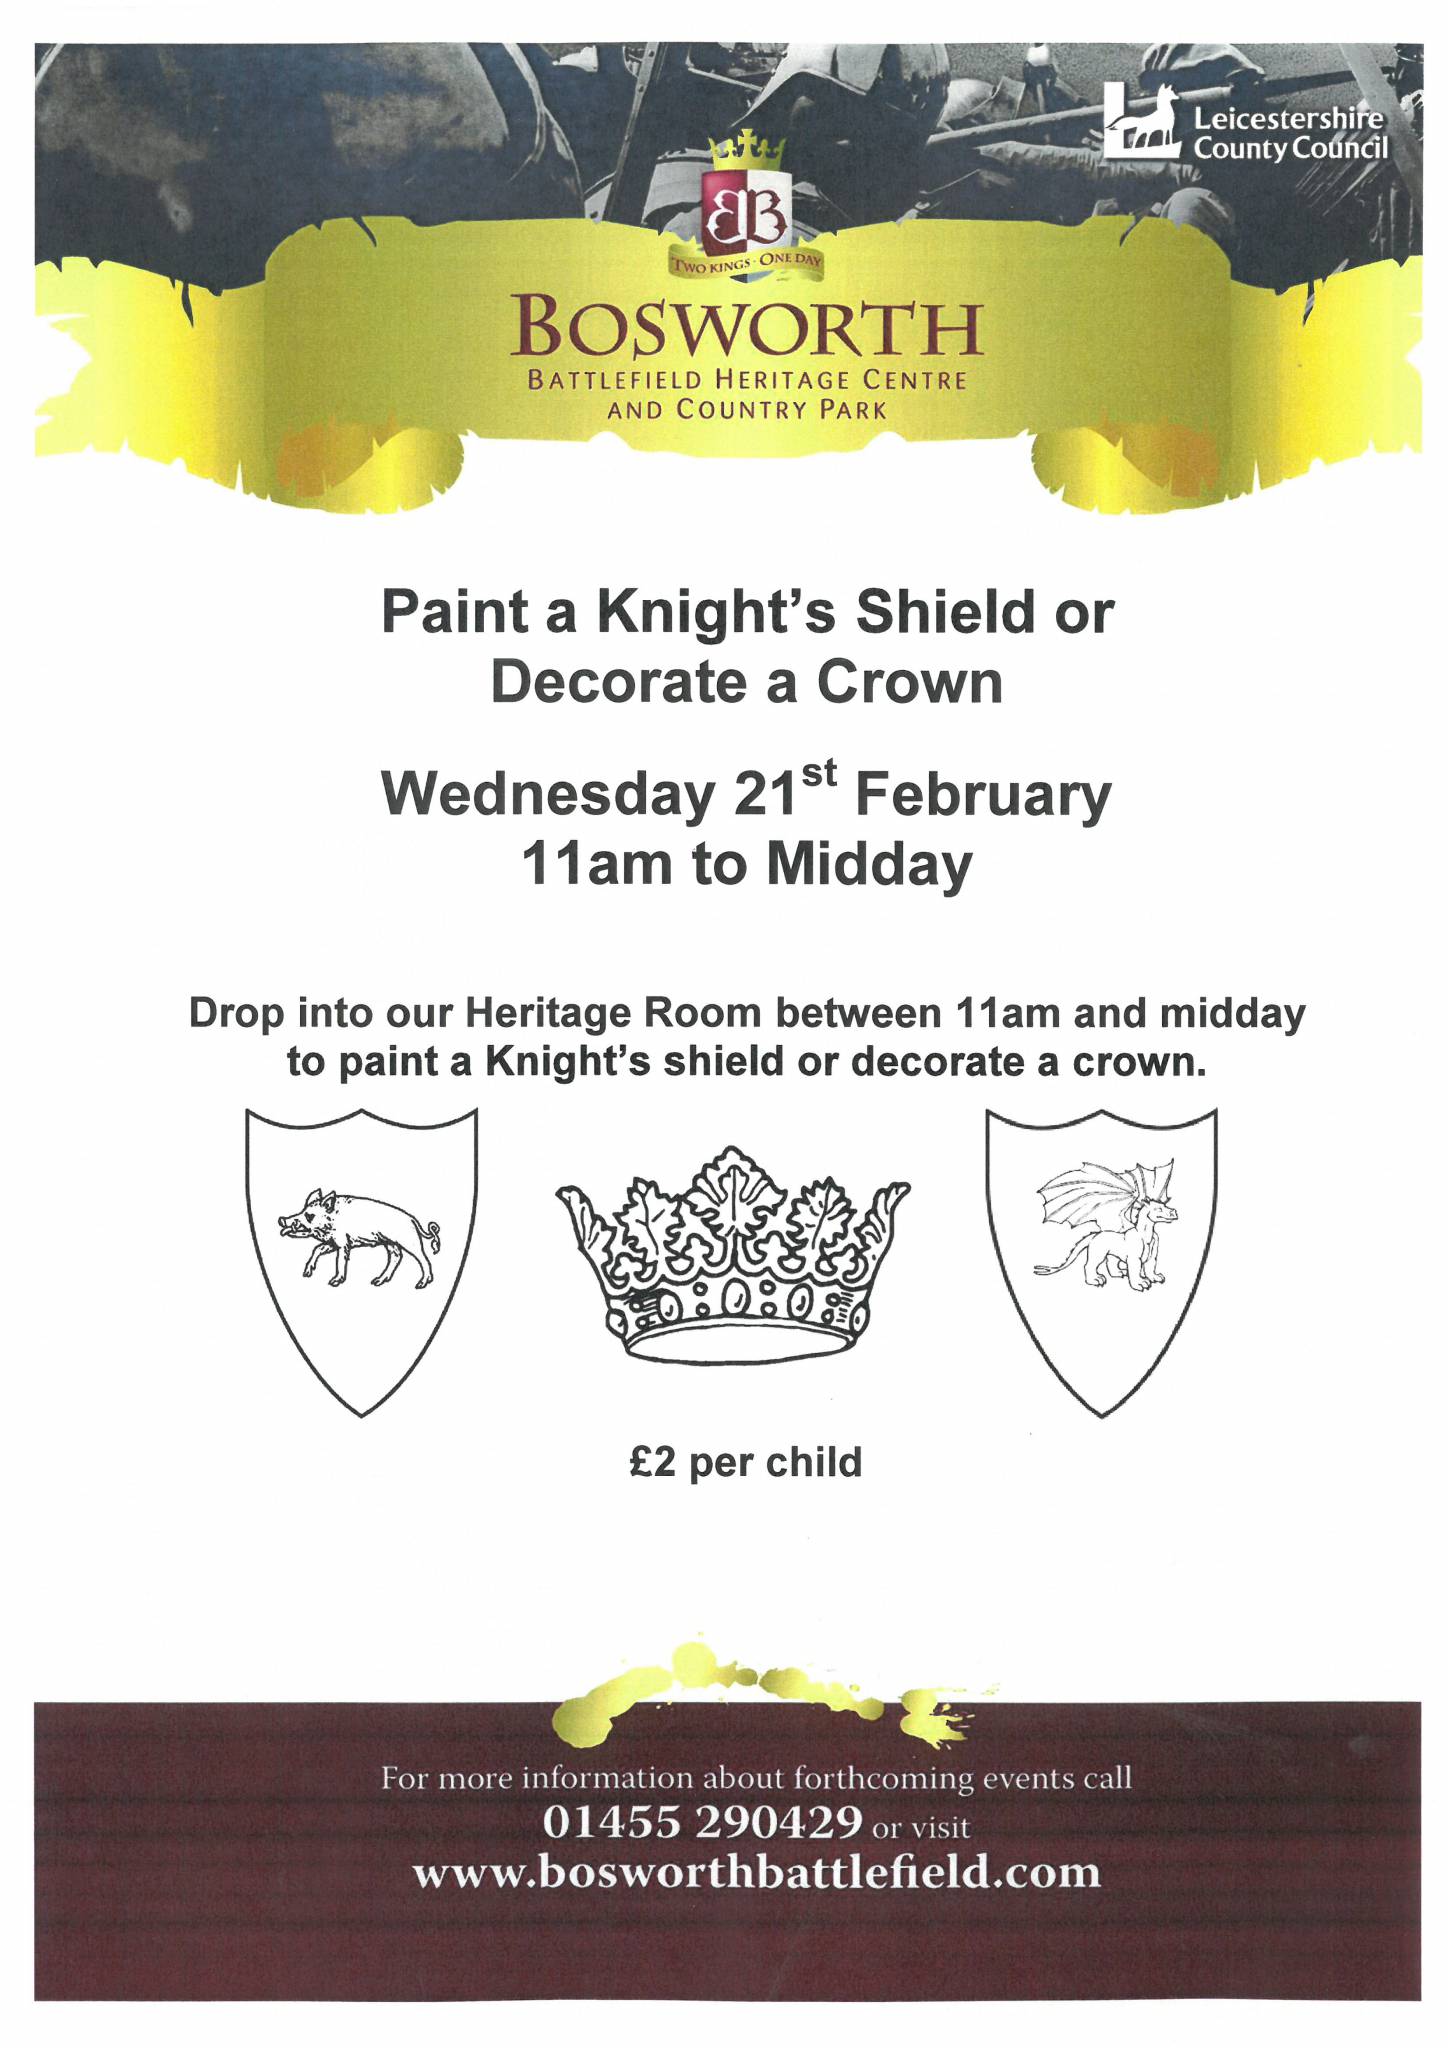 Paint a Knight's Shield or Decorate a Crown